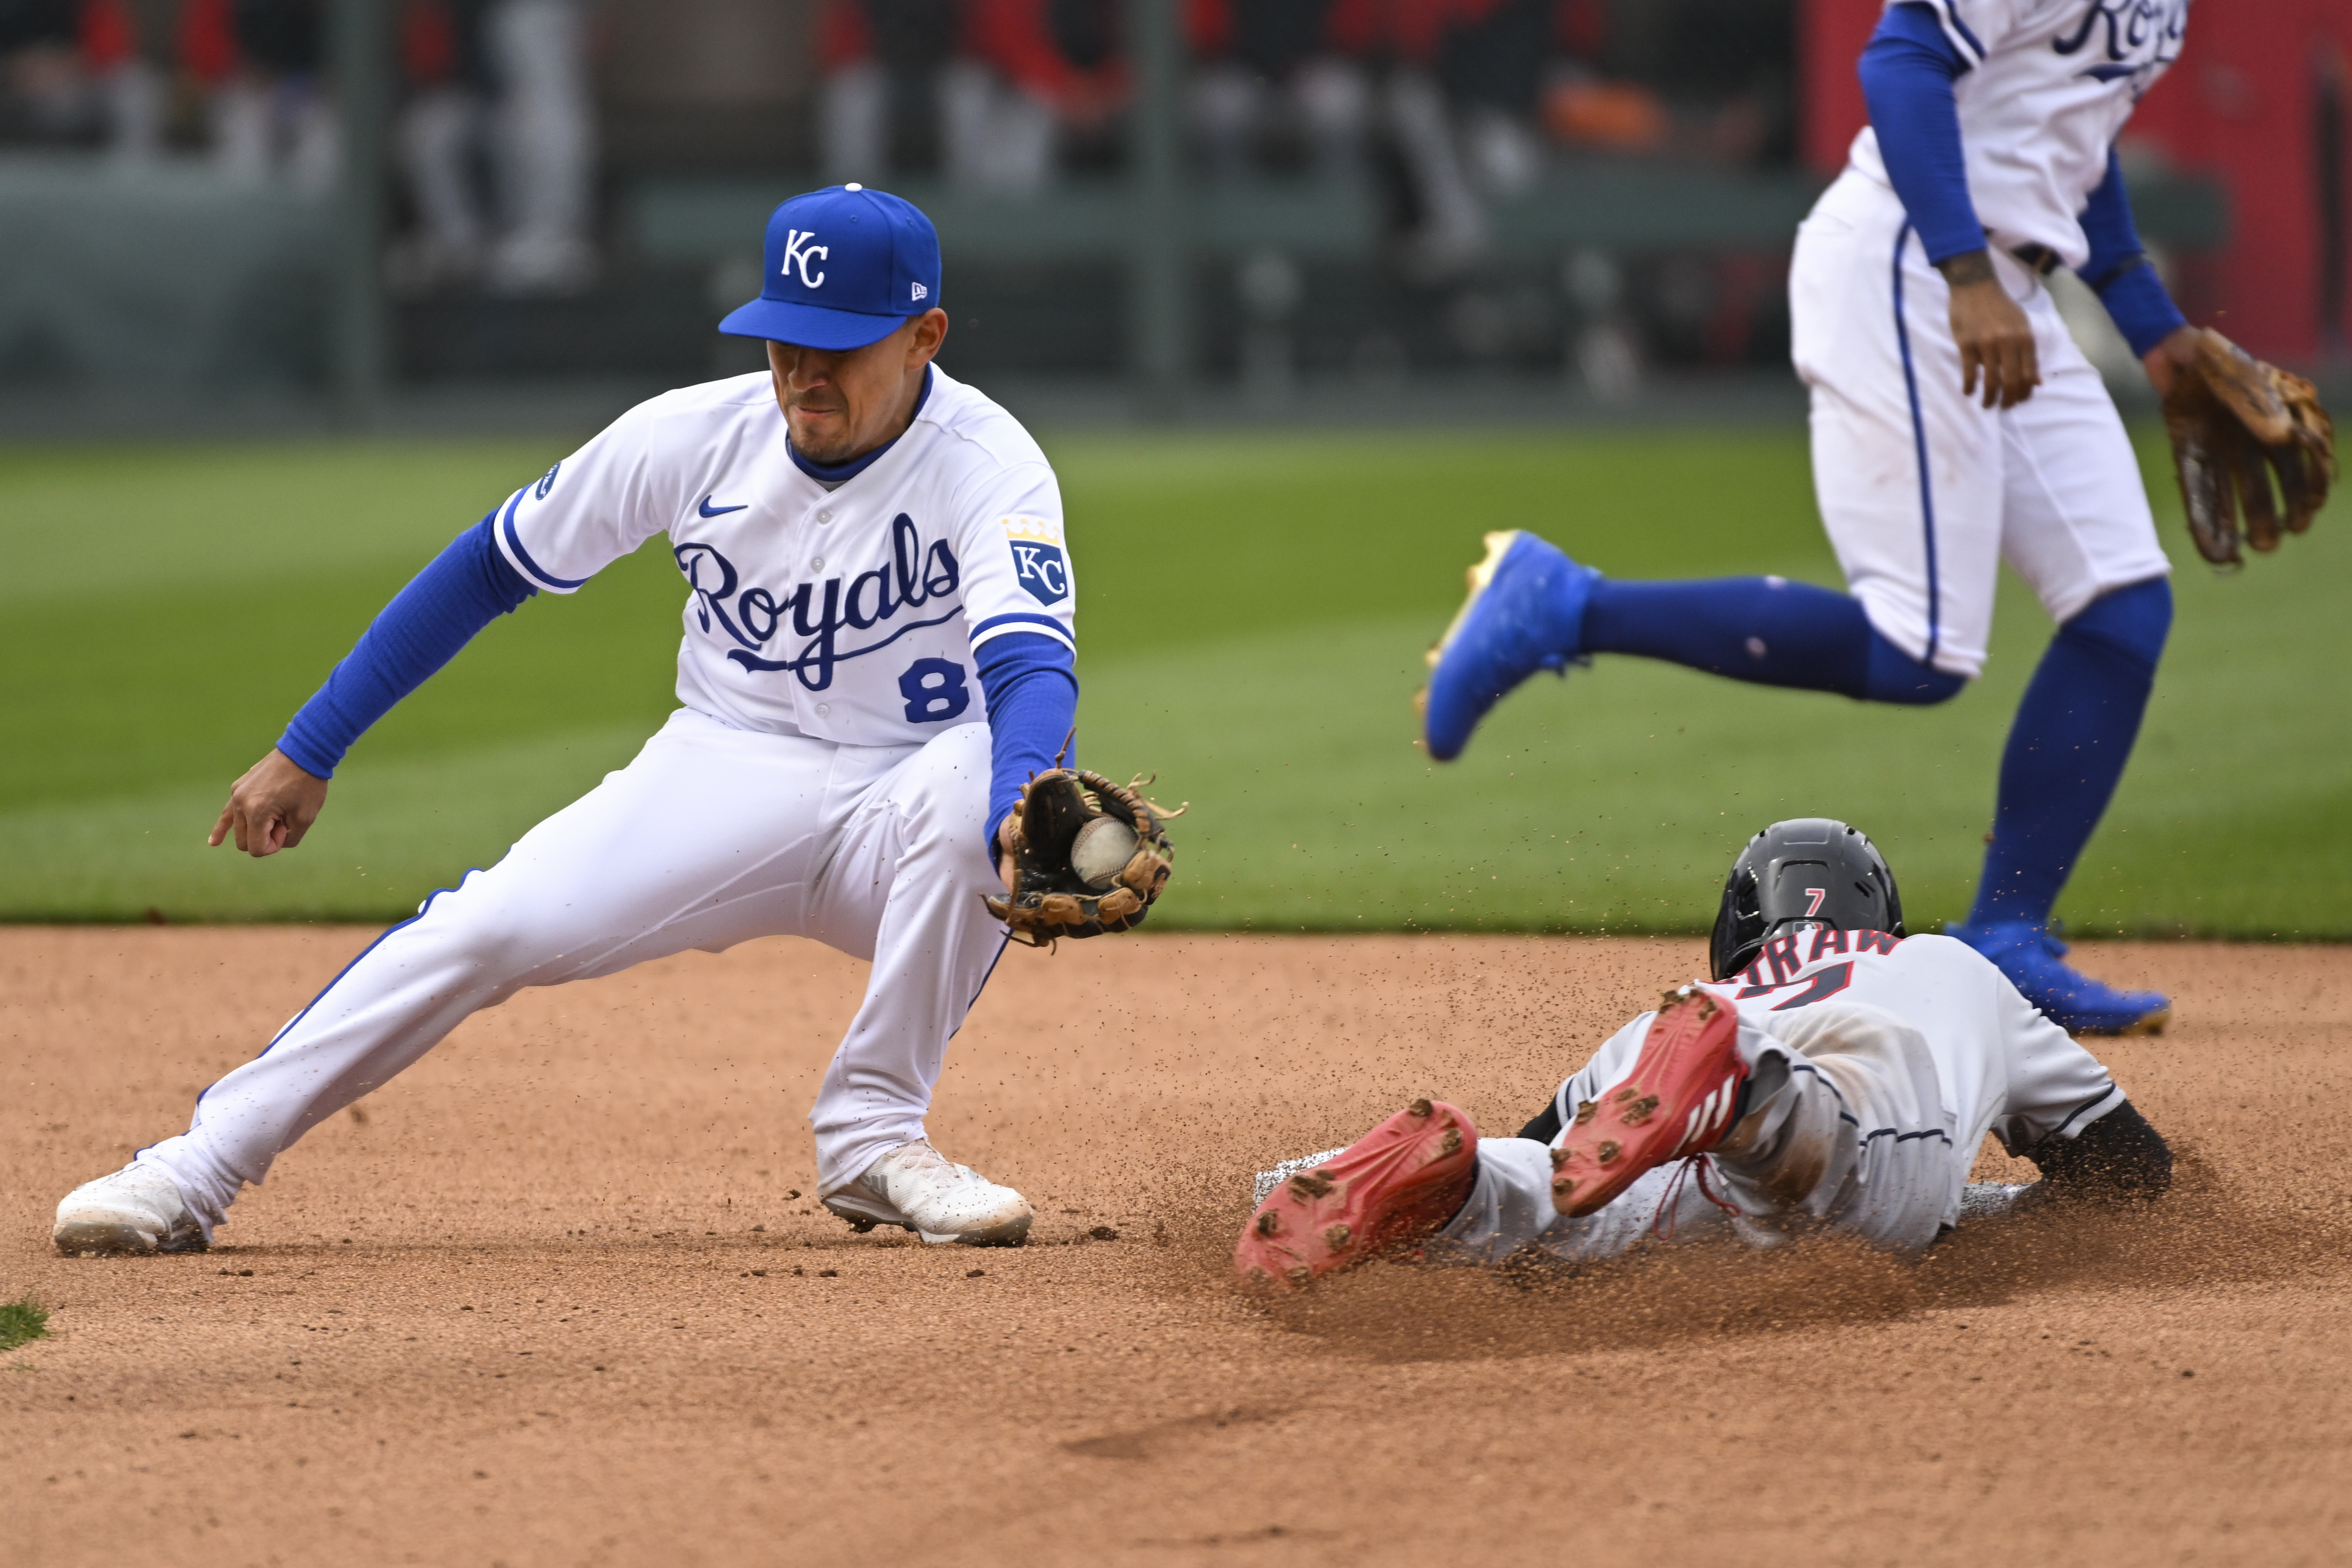 It might be time to start worrying about Whit Merrifield - Royals